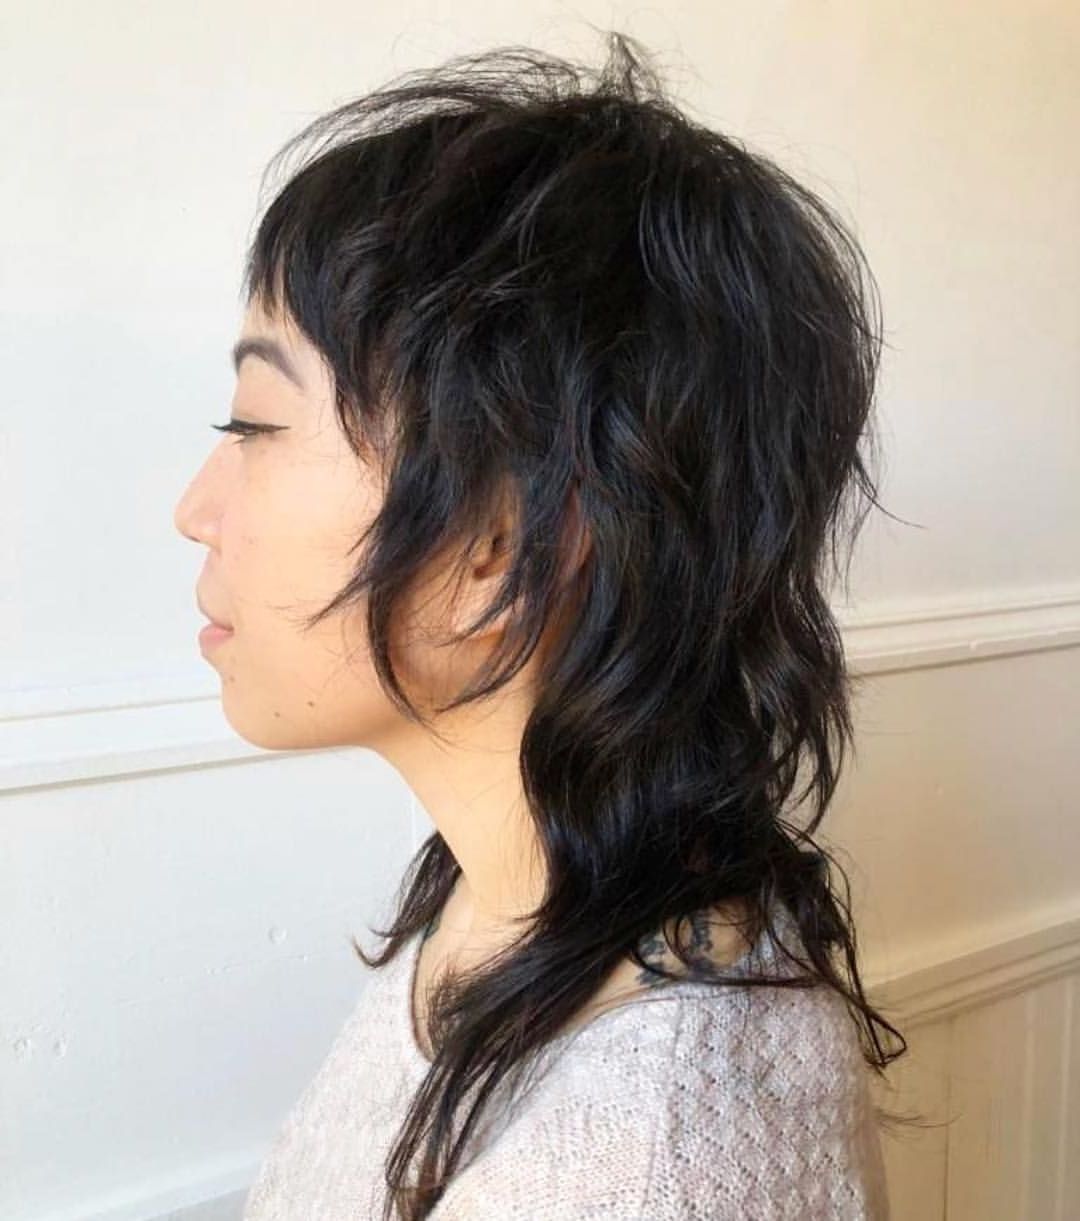 Interrupting Your Scroll With This Beauty ? Shag Or Mullet?  @windybirdrvahair #hairbrained #crafthairdresser | Edgy Hair, Punk Hair,  Mullet Hairstyle Inside Most Up To Date Shoulder Grazing Mullet With Choppy Bangs (View 11 of 18)